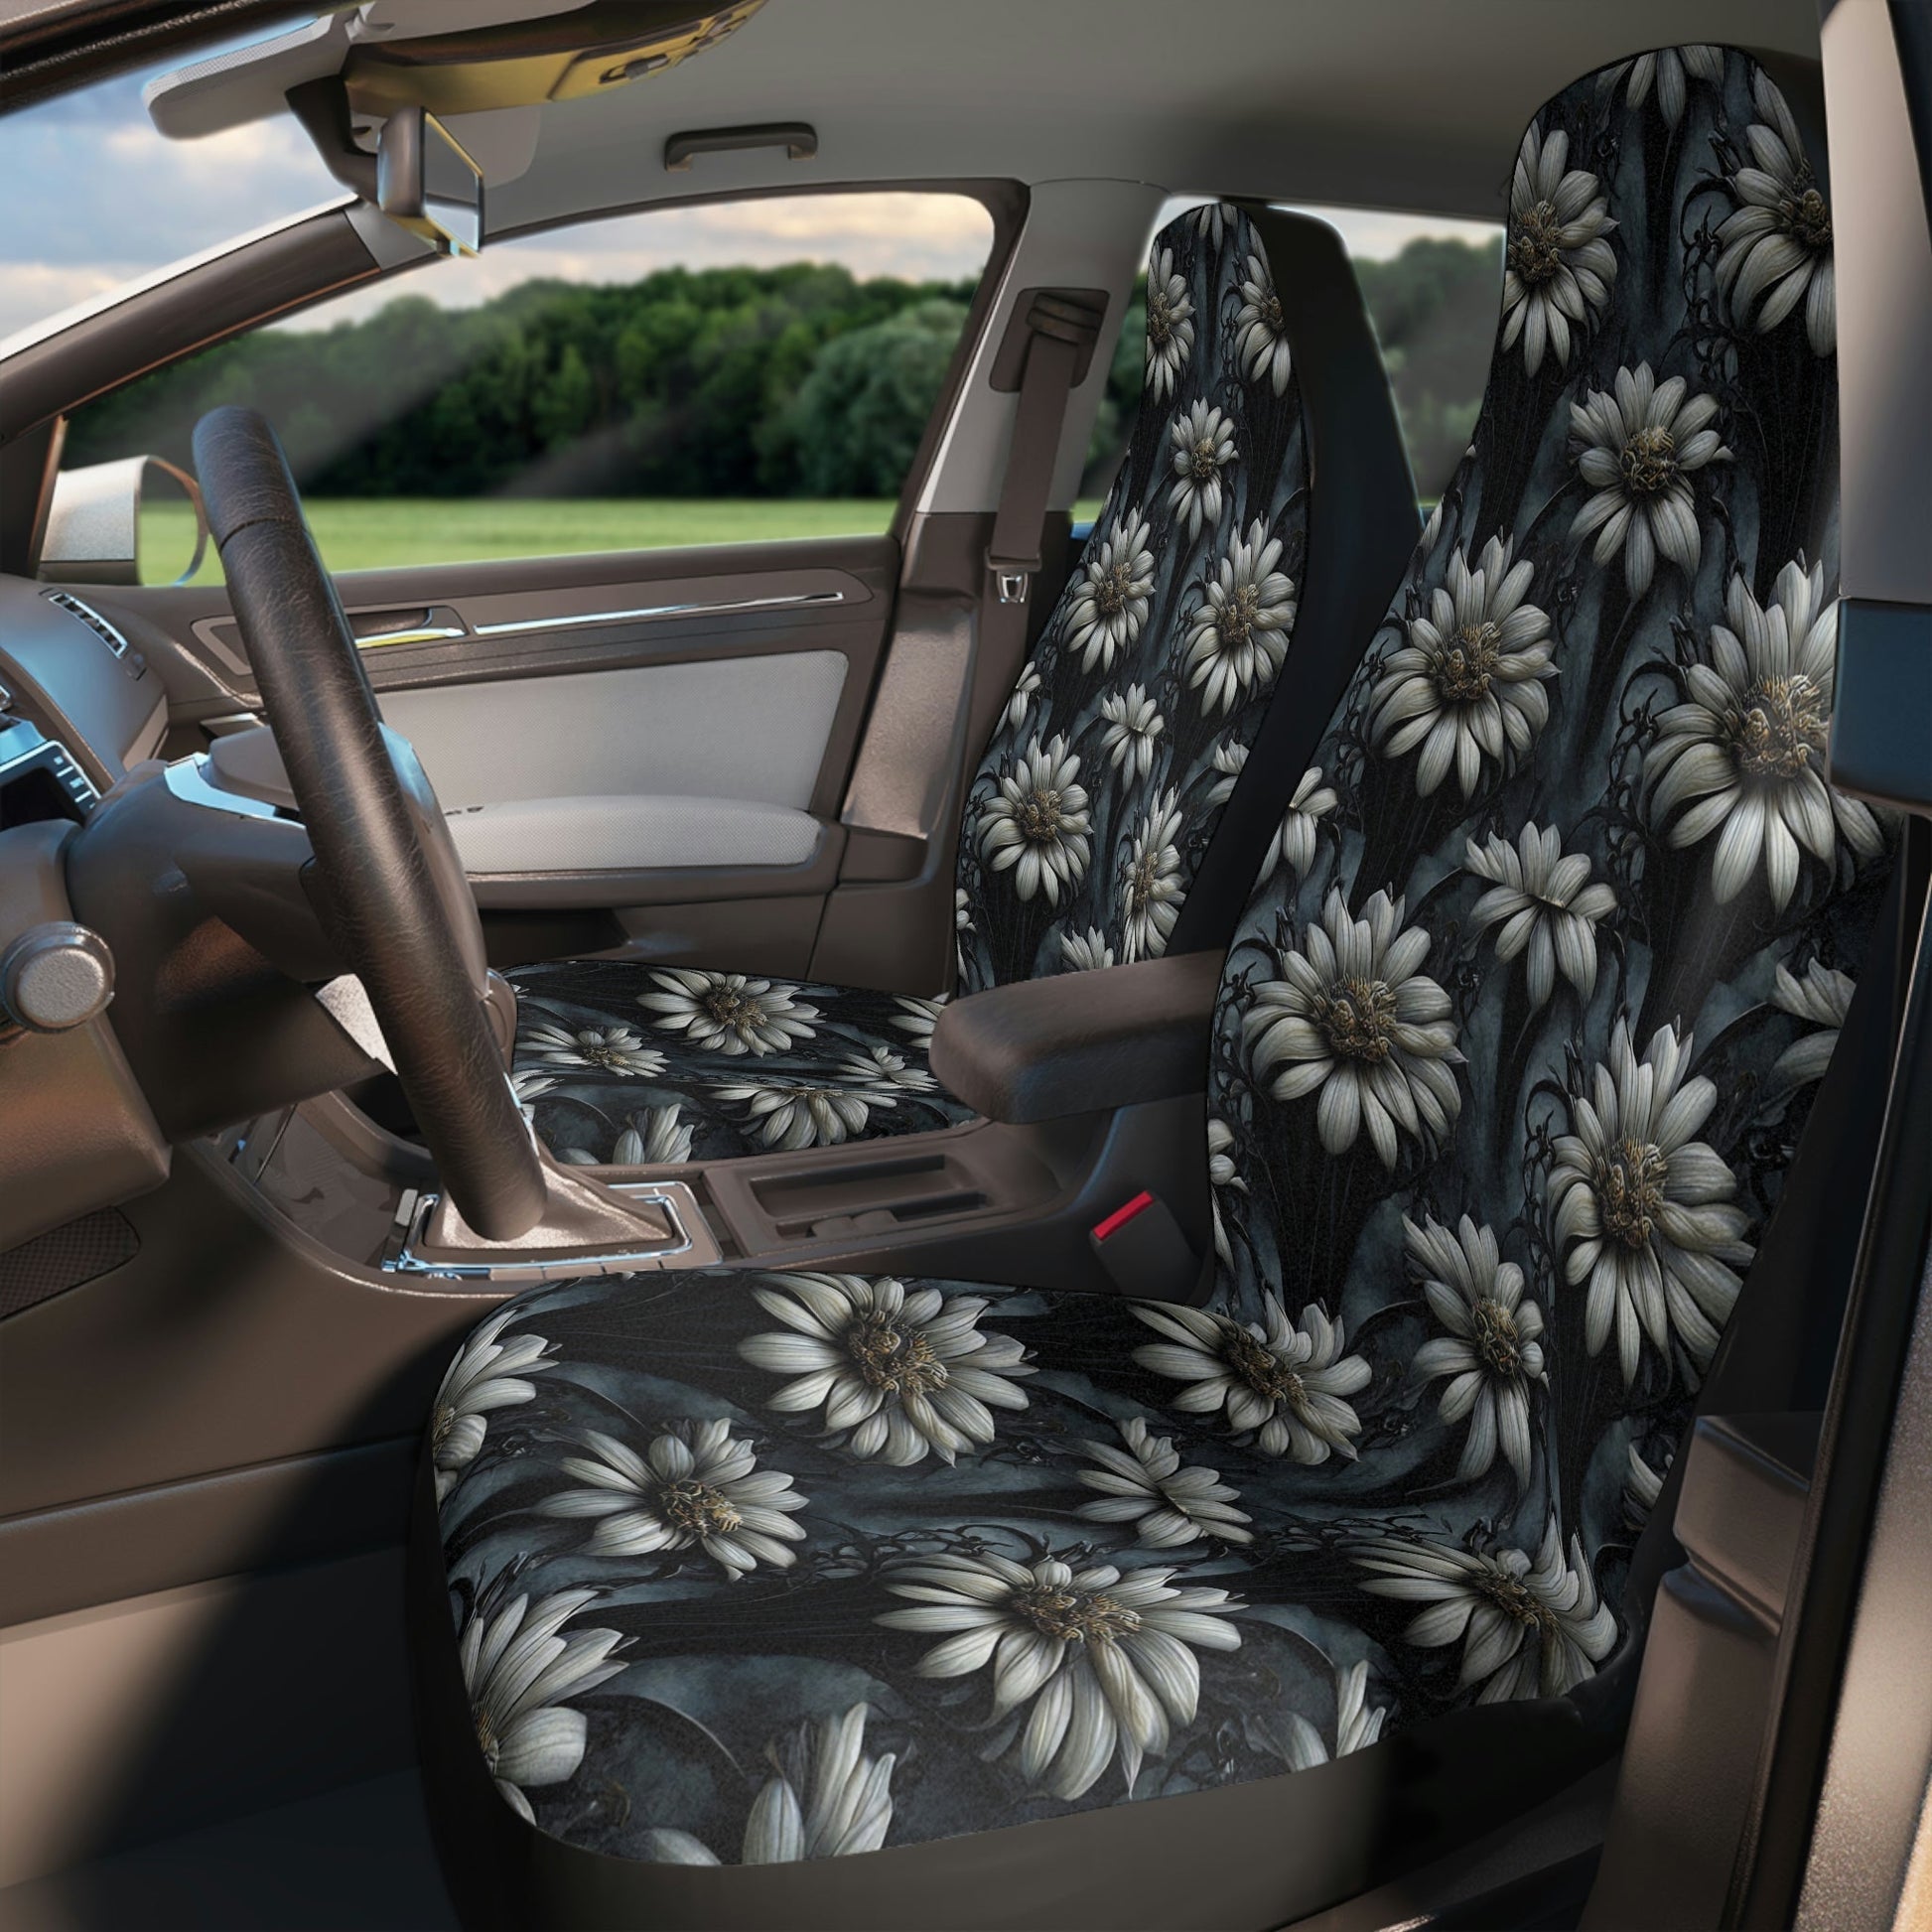 Black Floral Car Seat Covers, Gothic Car Accessories for Women, Car Décor, Universal Car Seat Covers, Vehicle Seat Covers